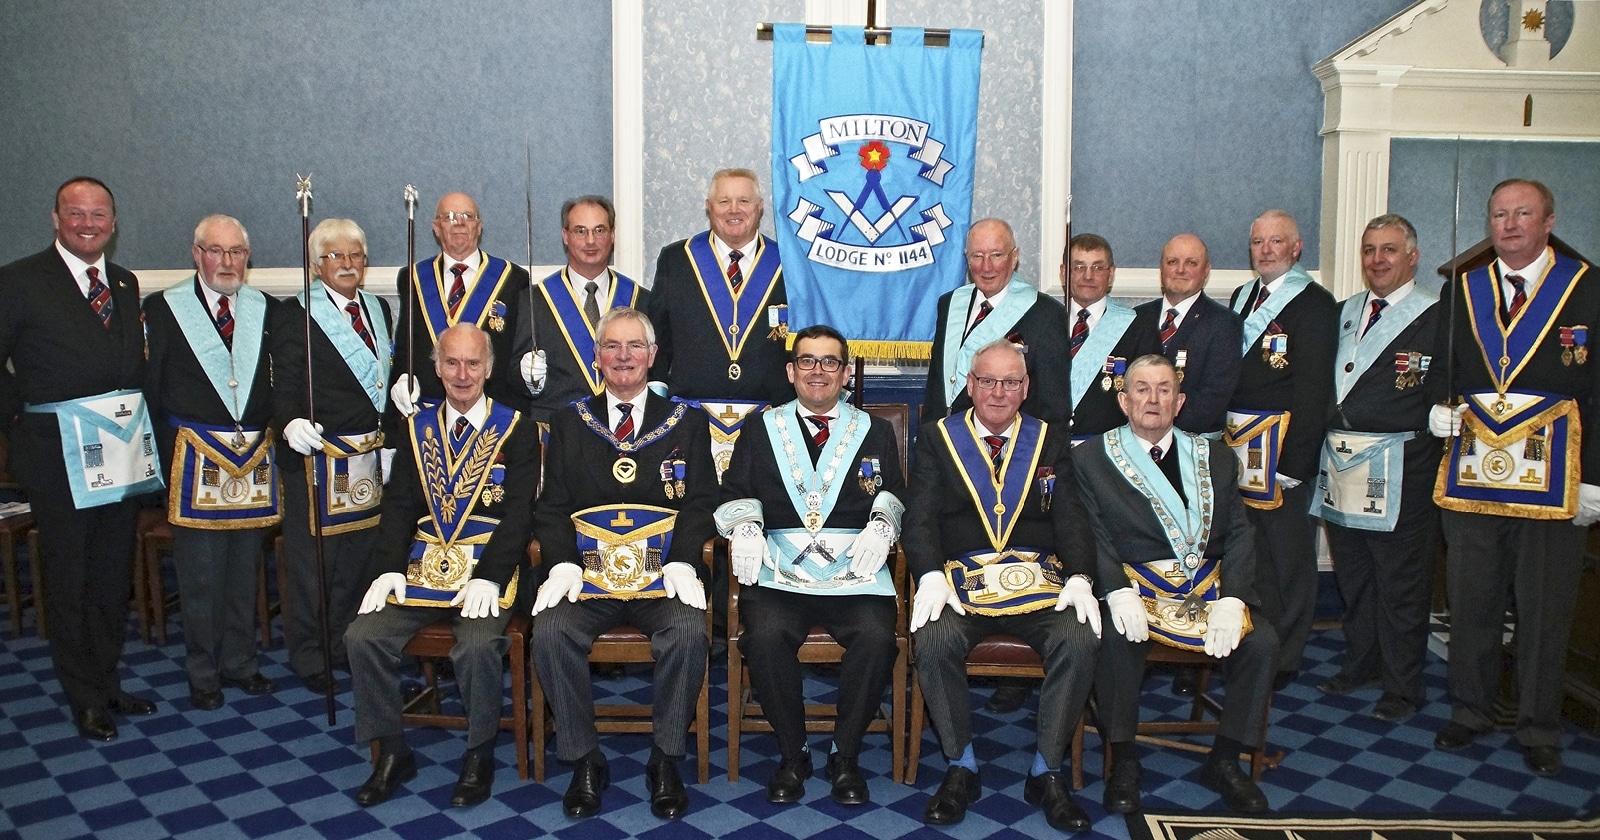 Milton Lodge – The Dedication of a new Lodge Banner